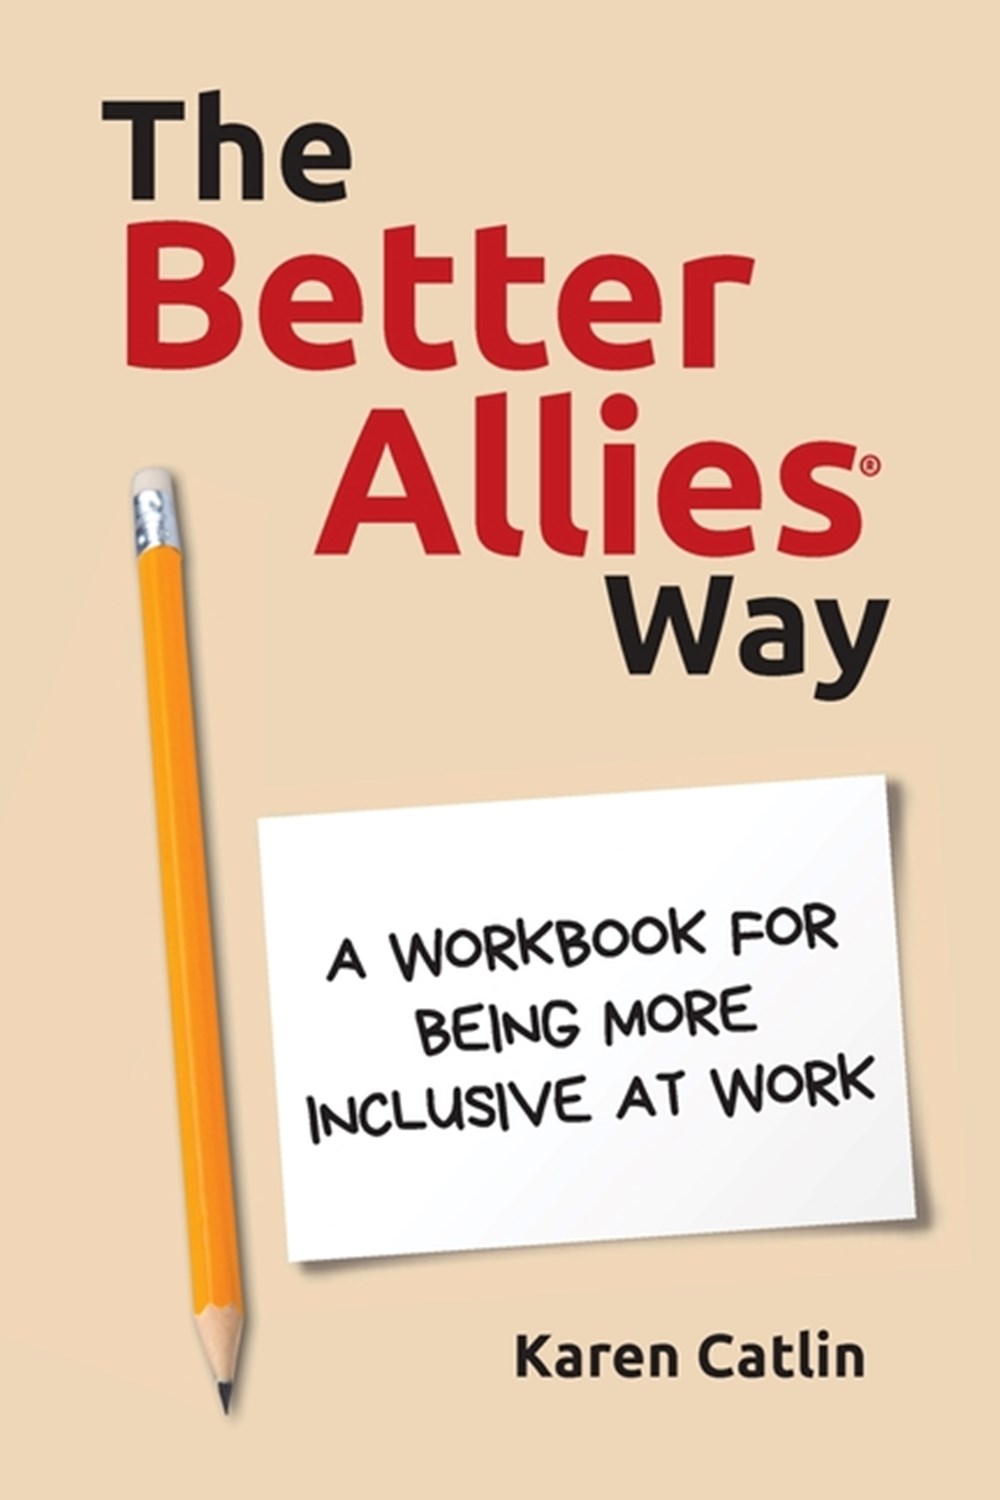 Better Allies(R) Way: A Workbook for Being More Inclusive at Work